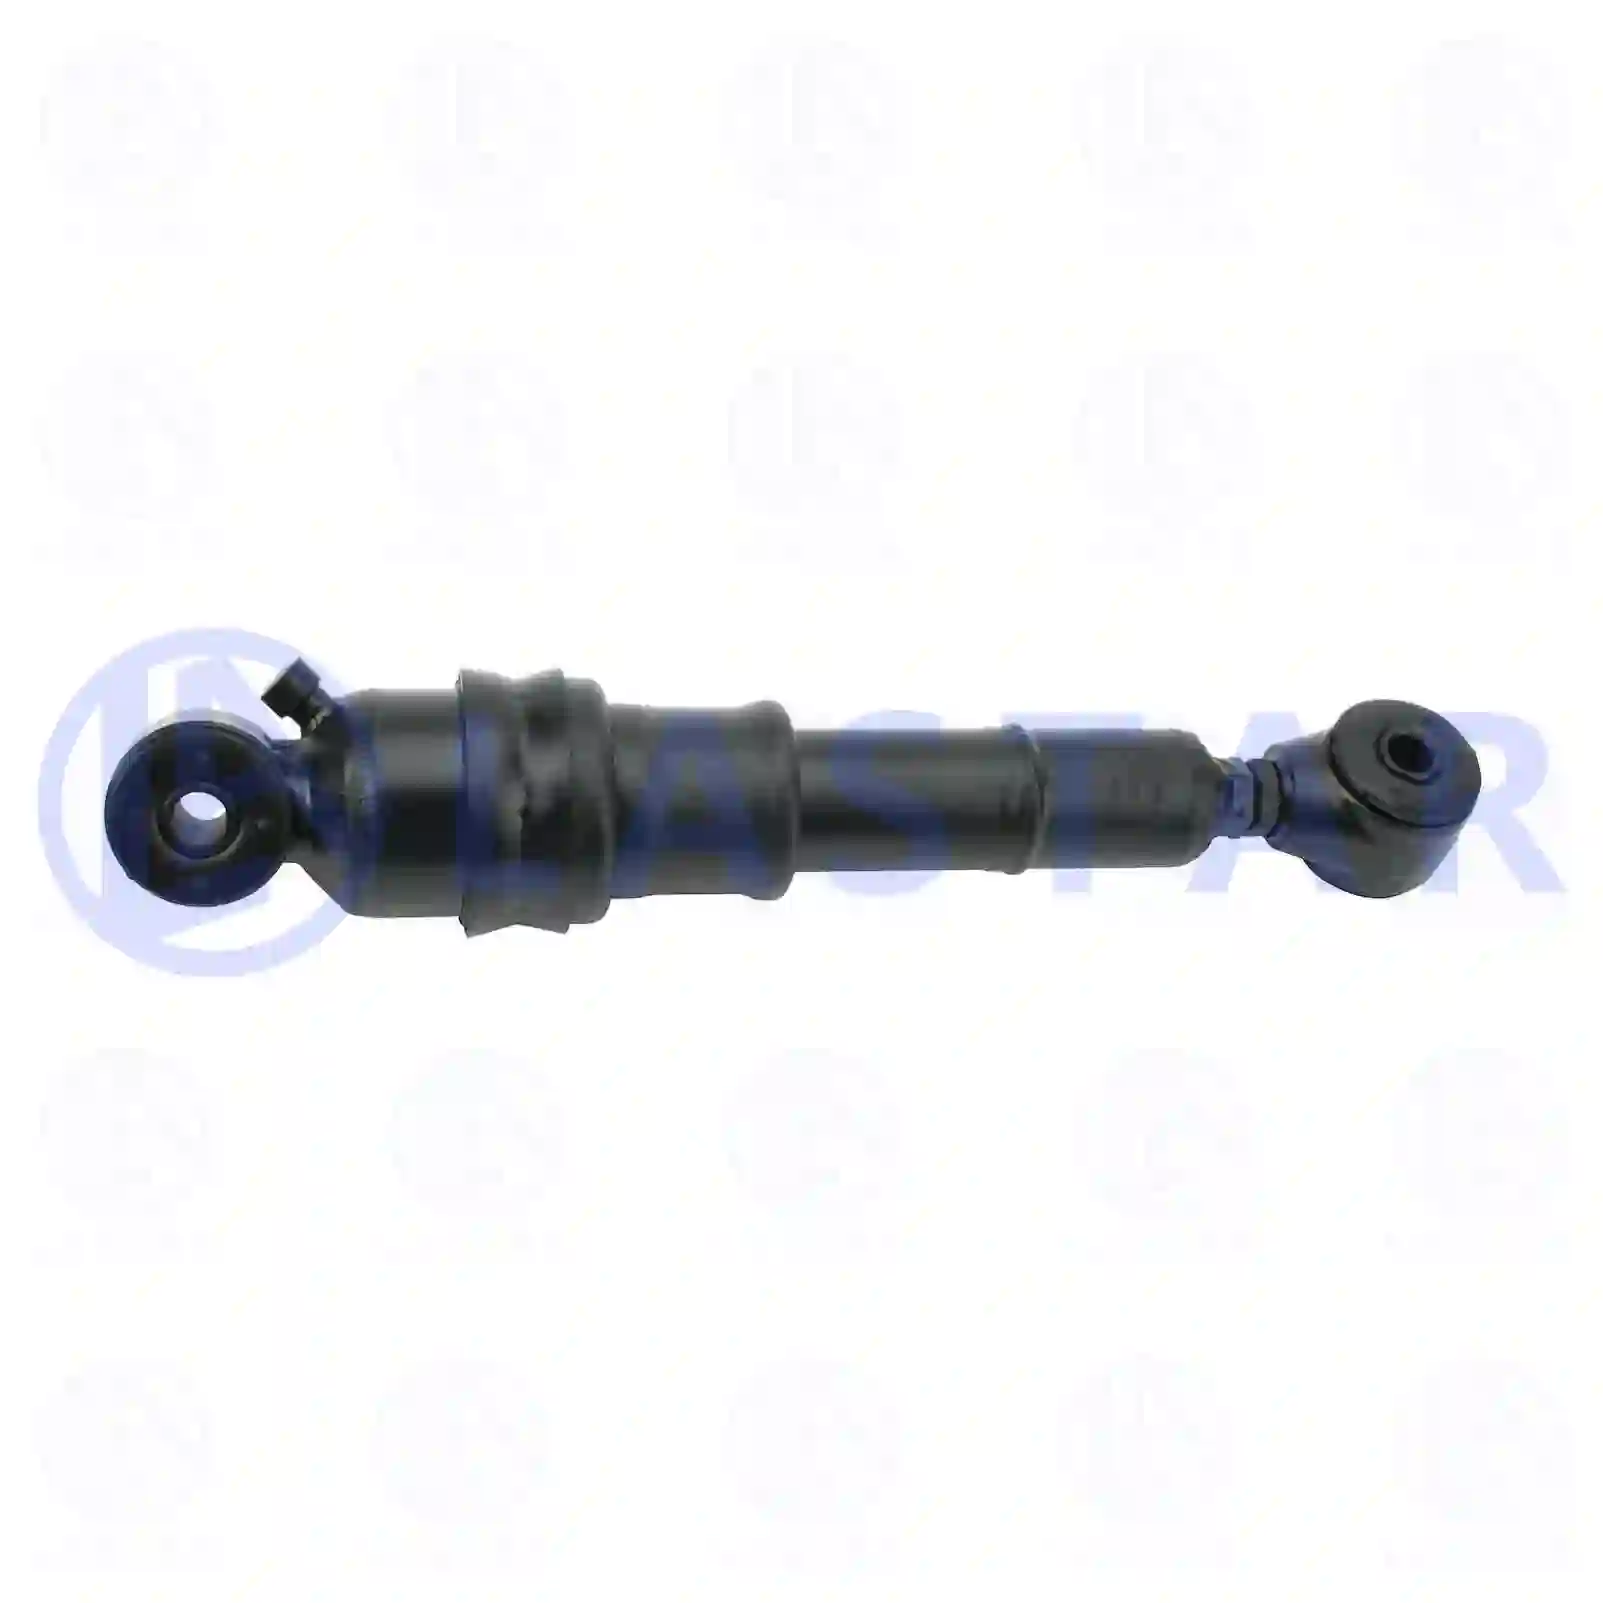 Cabin shock absorber, with air bellow, 77734730, 1099672 ||  77734730 Lastar Spare Part | Truck Spare Parts, Auotomotive Spare Parts Cabin shock absorber, with air bellow, 77734730, 1099672 ||  77734730 Lastar Spare Part | Truck Spare Parts, Auotomotive Spare Parts